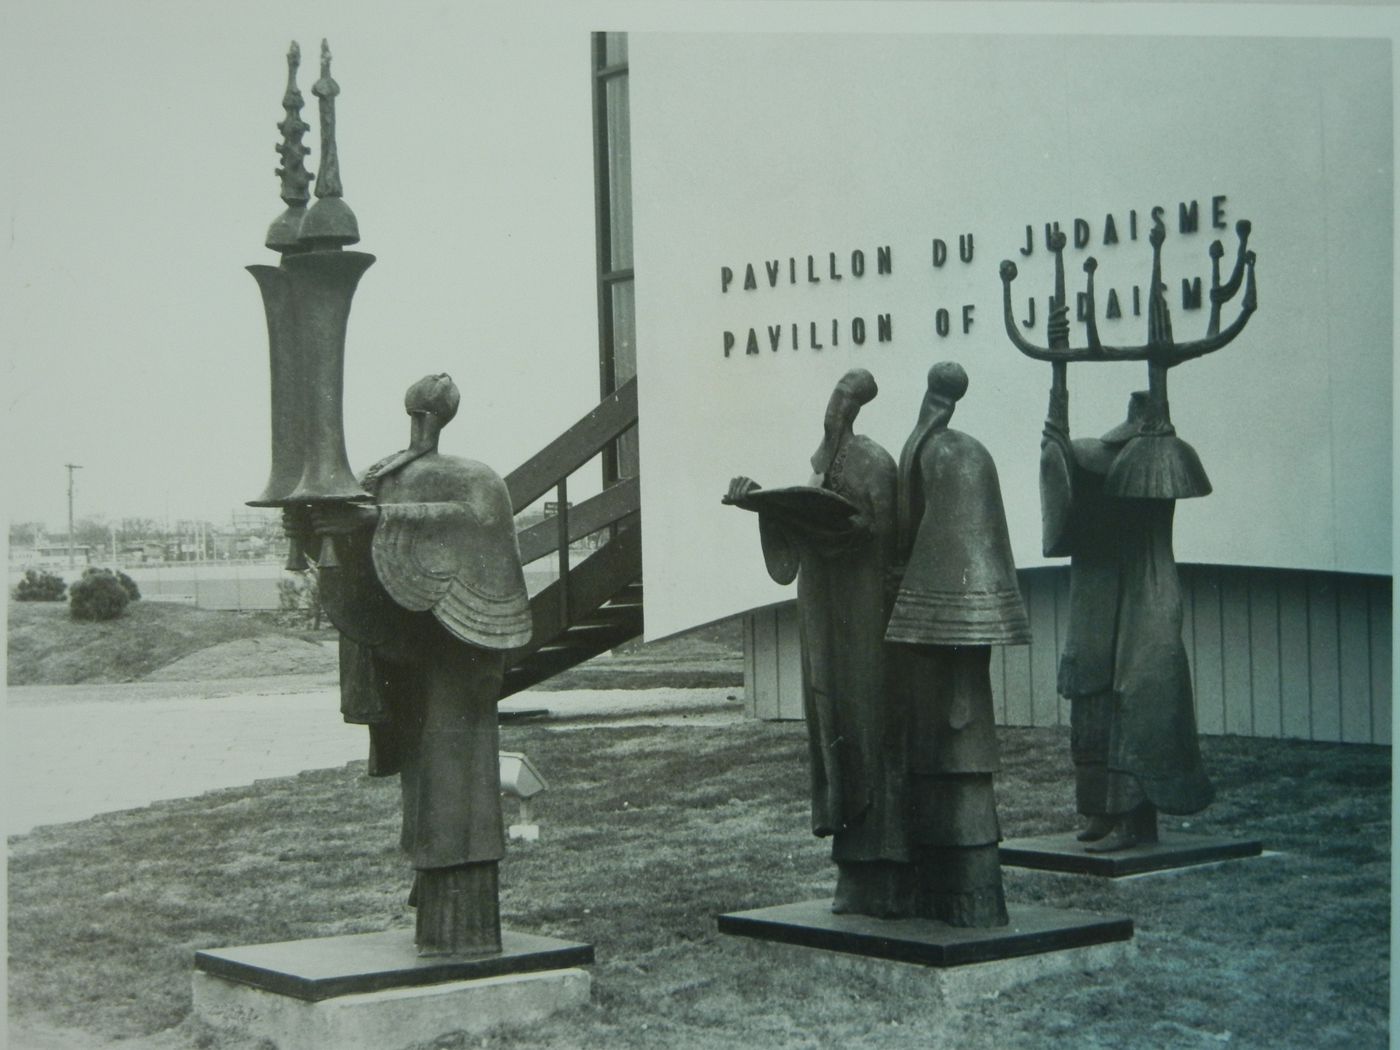 View of the sculpture 'The Procession' by Elbert Weinberg at the Pavilion of Judaism, Expo 67, Montréal, Québec